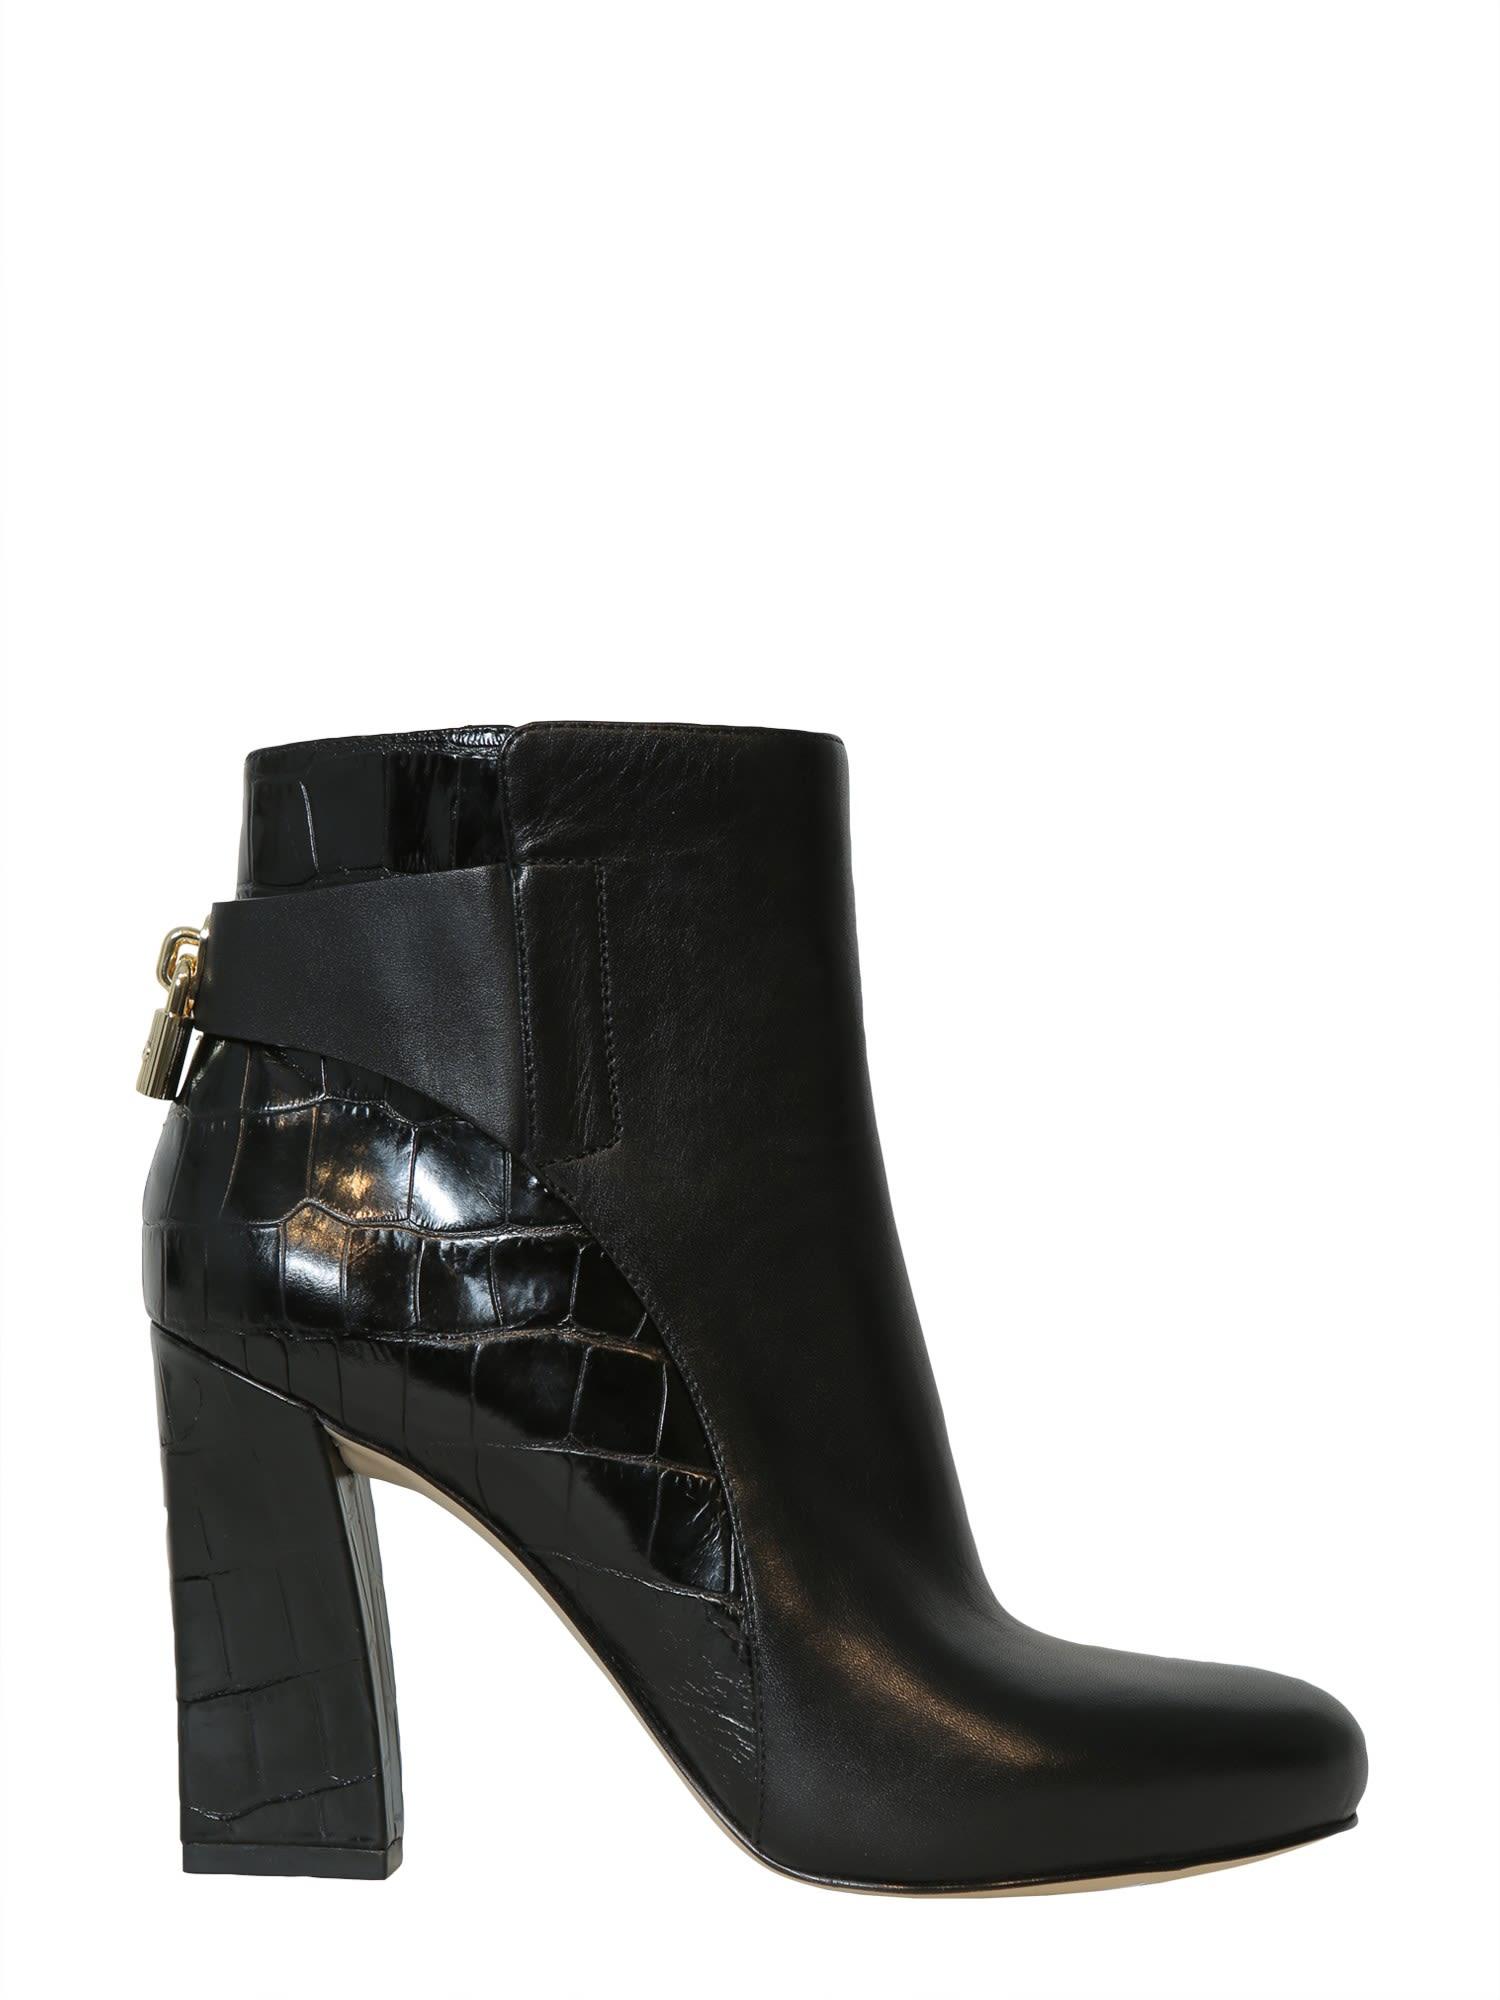 michael kors mira ankle boots